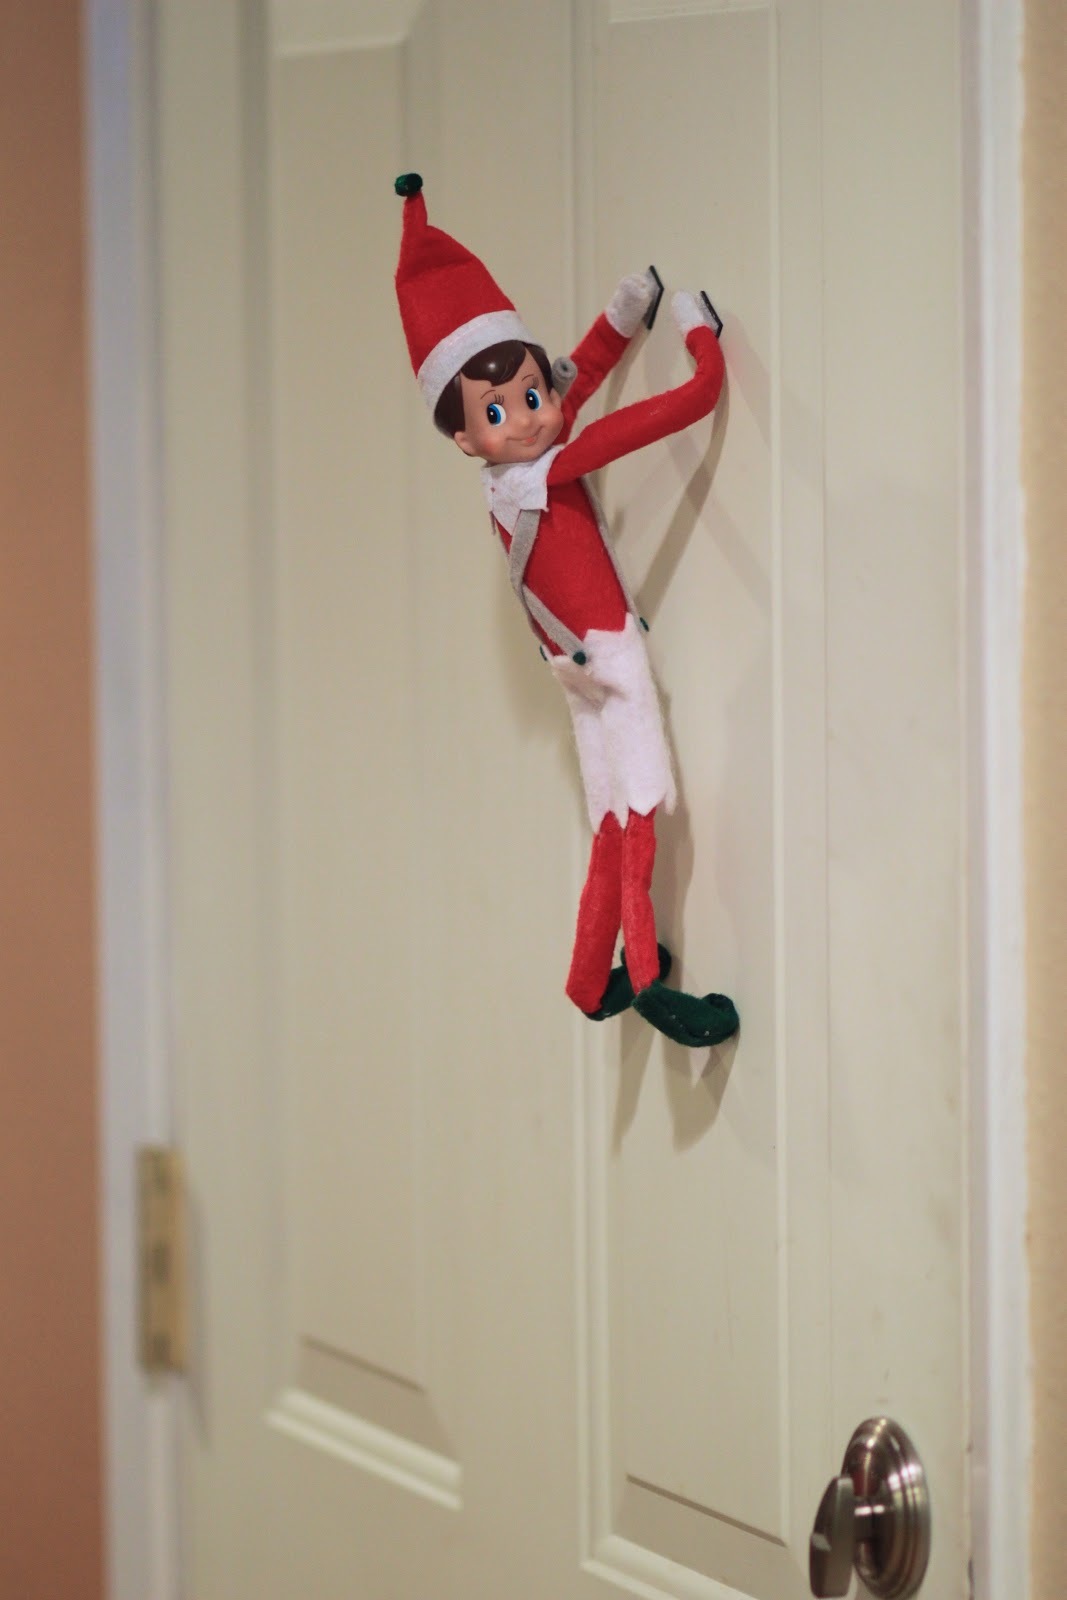 watch out for the woestmans: Elf on the Shelf Update